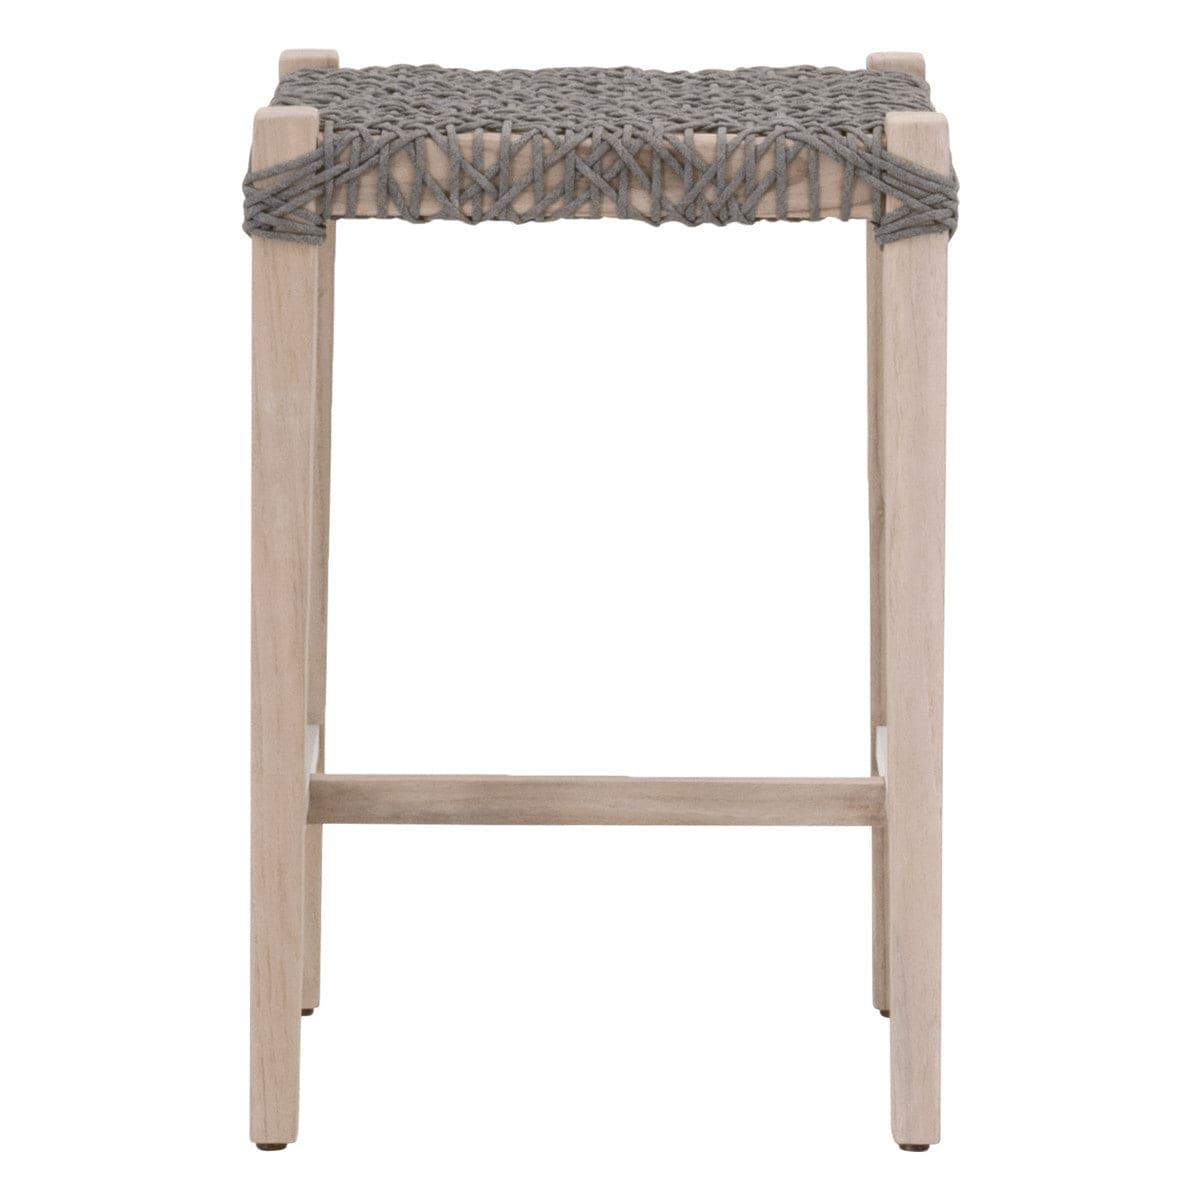 Boxhill's Woven Costa Outdoor Backless Counter Stool solo image